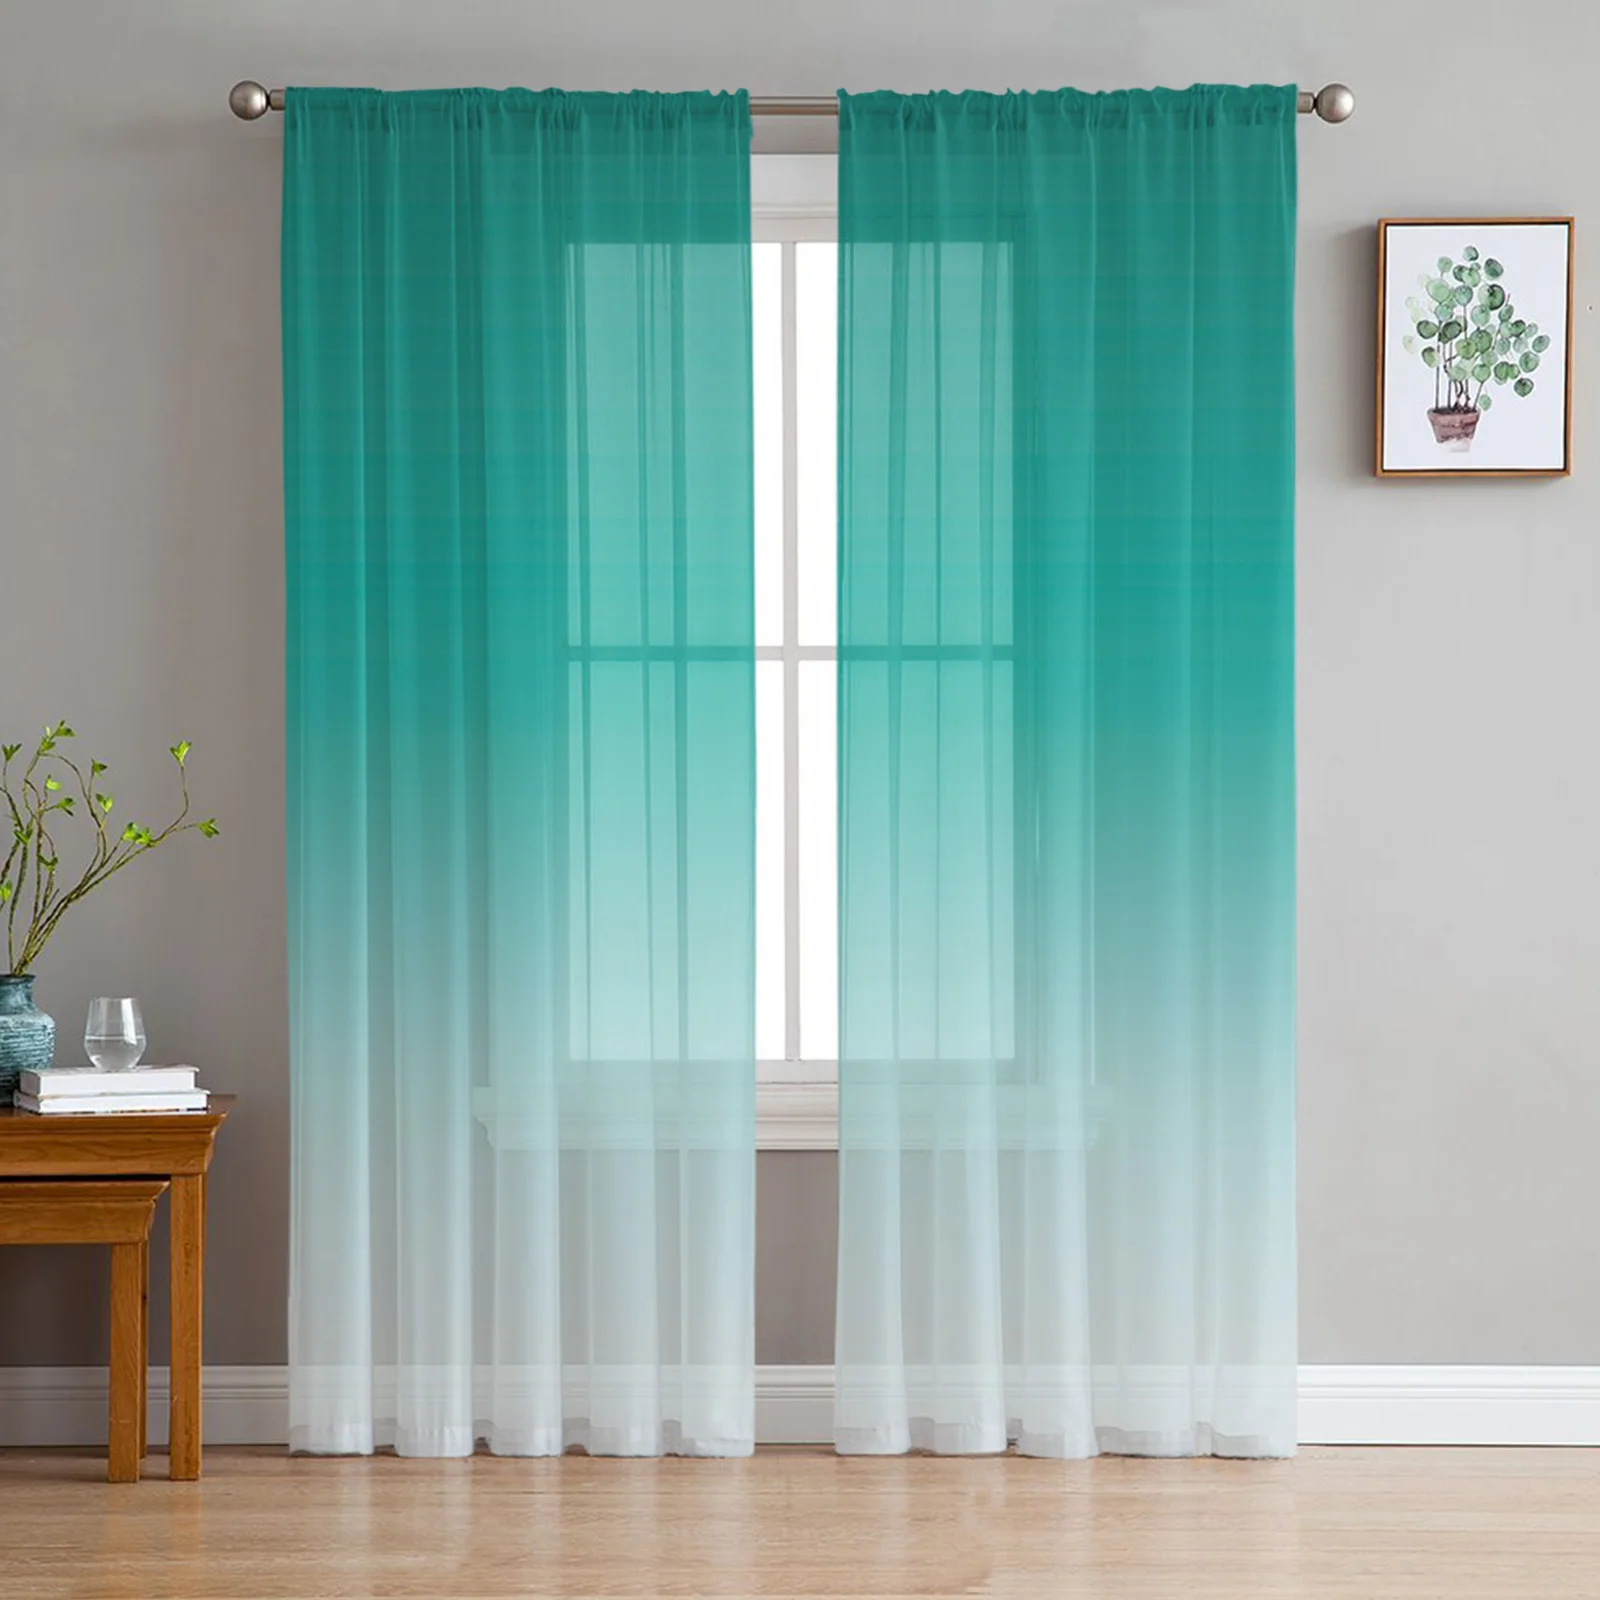 

Cyan Turquoise Gradient Tulle Curtains For Living Room Voile Sheer Window Curtain For Bedroom Chiffon Curtains For Kitchen